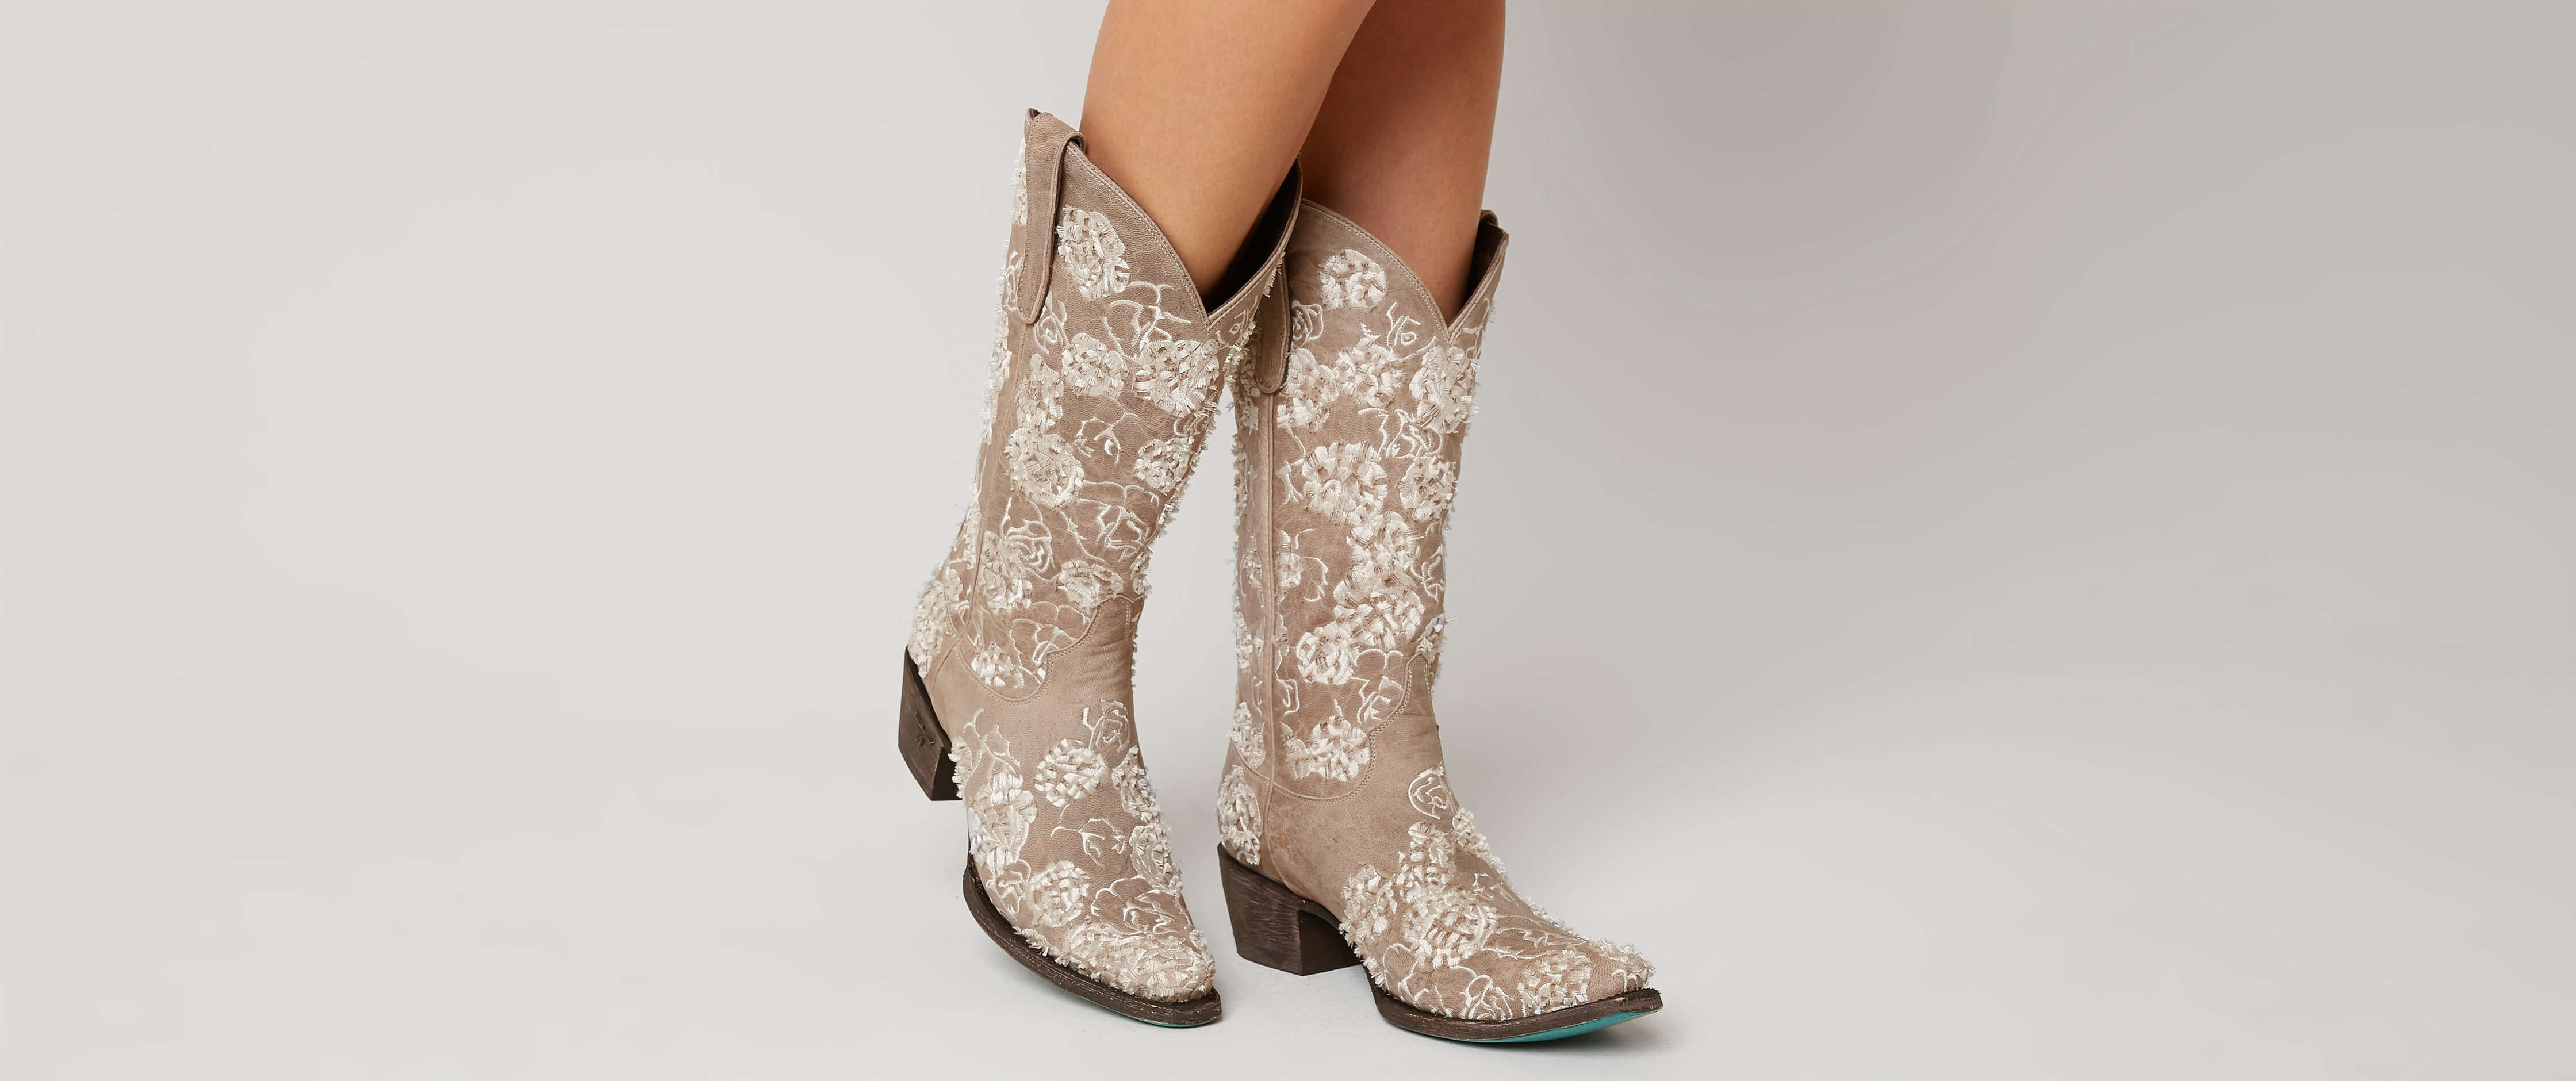 cowboy boots with roses